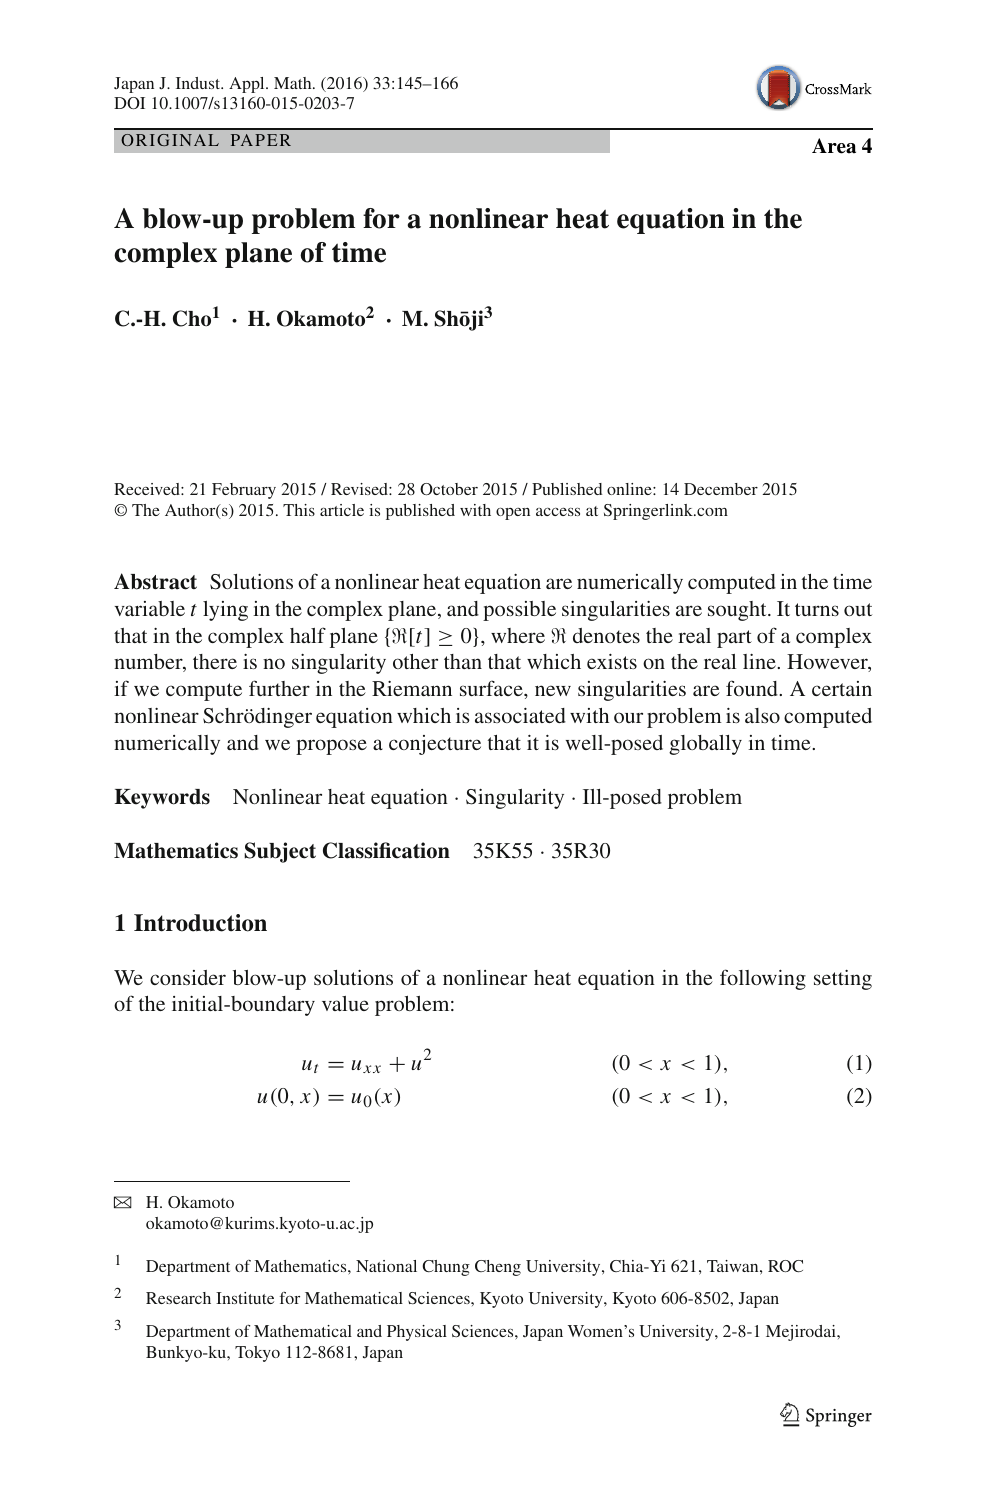 A Blow Up Problem For A Nonlinear Heat Equation In The Complex Plane Of Time Topic Of Research Paper In Mathematics Download Scholarly Article Pdf And Read For Free On Cyberleninka Open